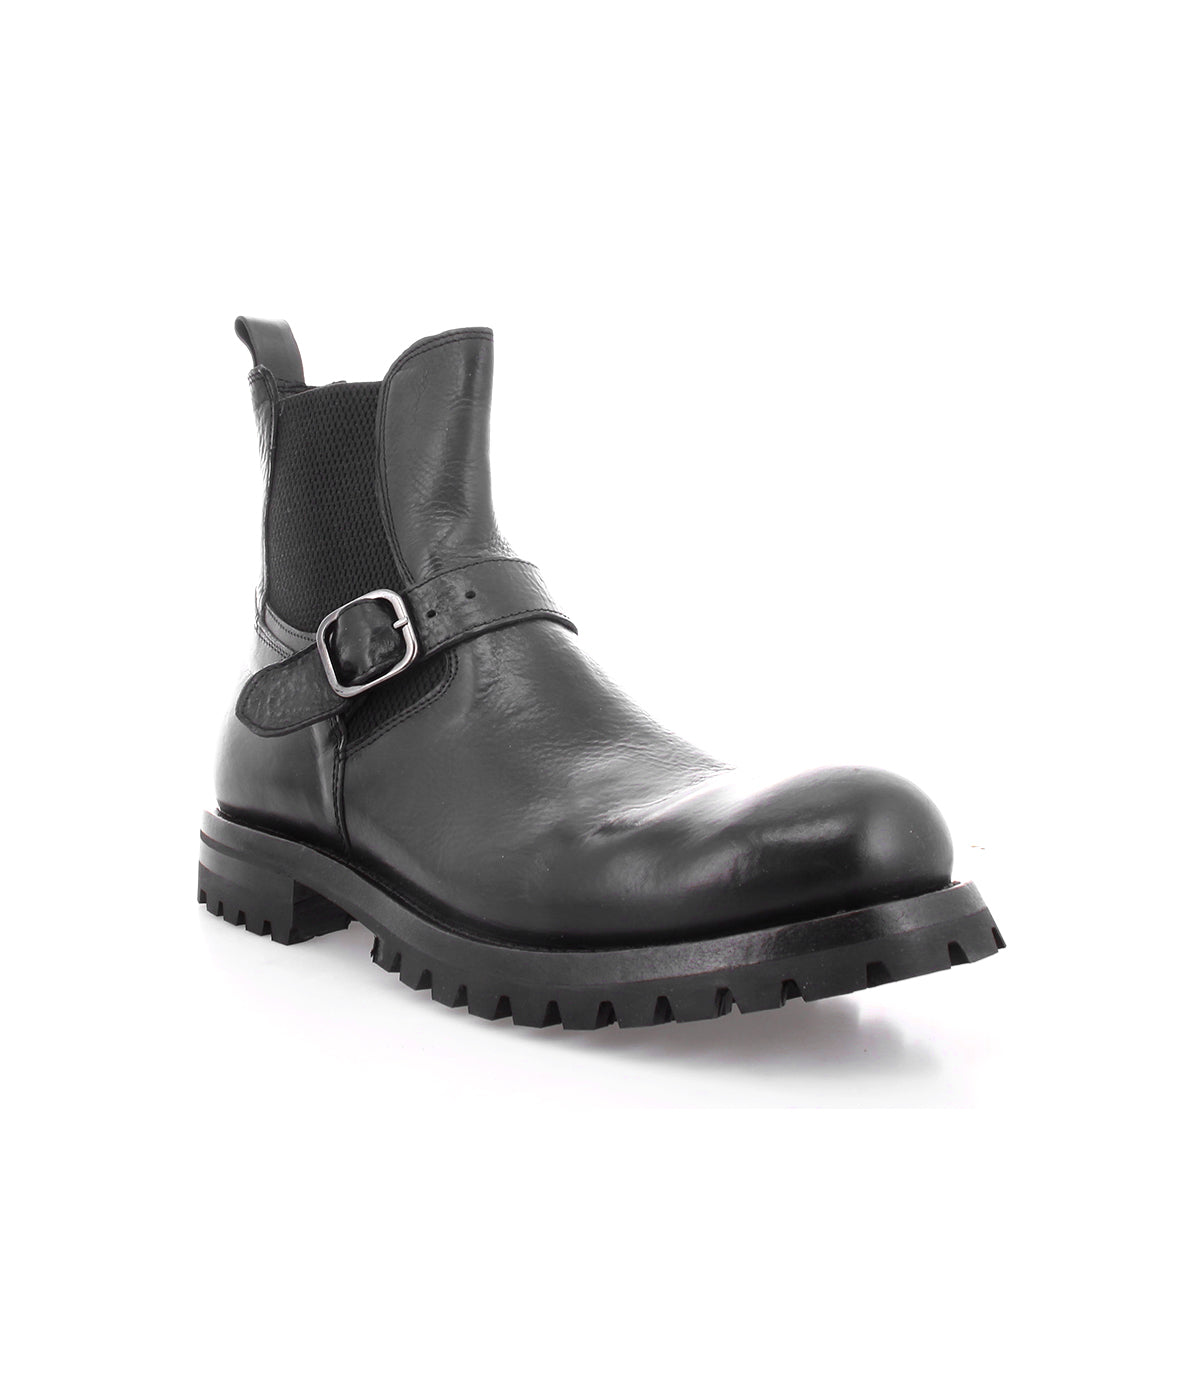 Sleek men's black leather Bed Stu Chelsea boots with buckles, crafted from Italian leather.